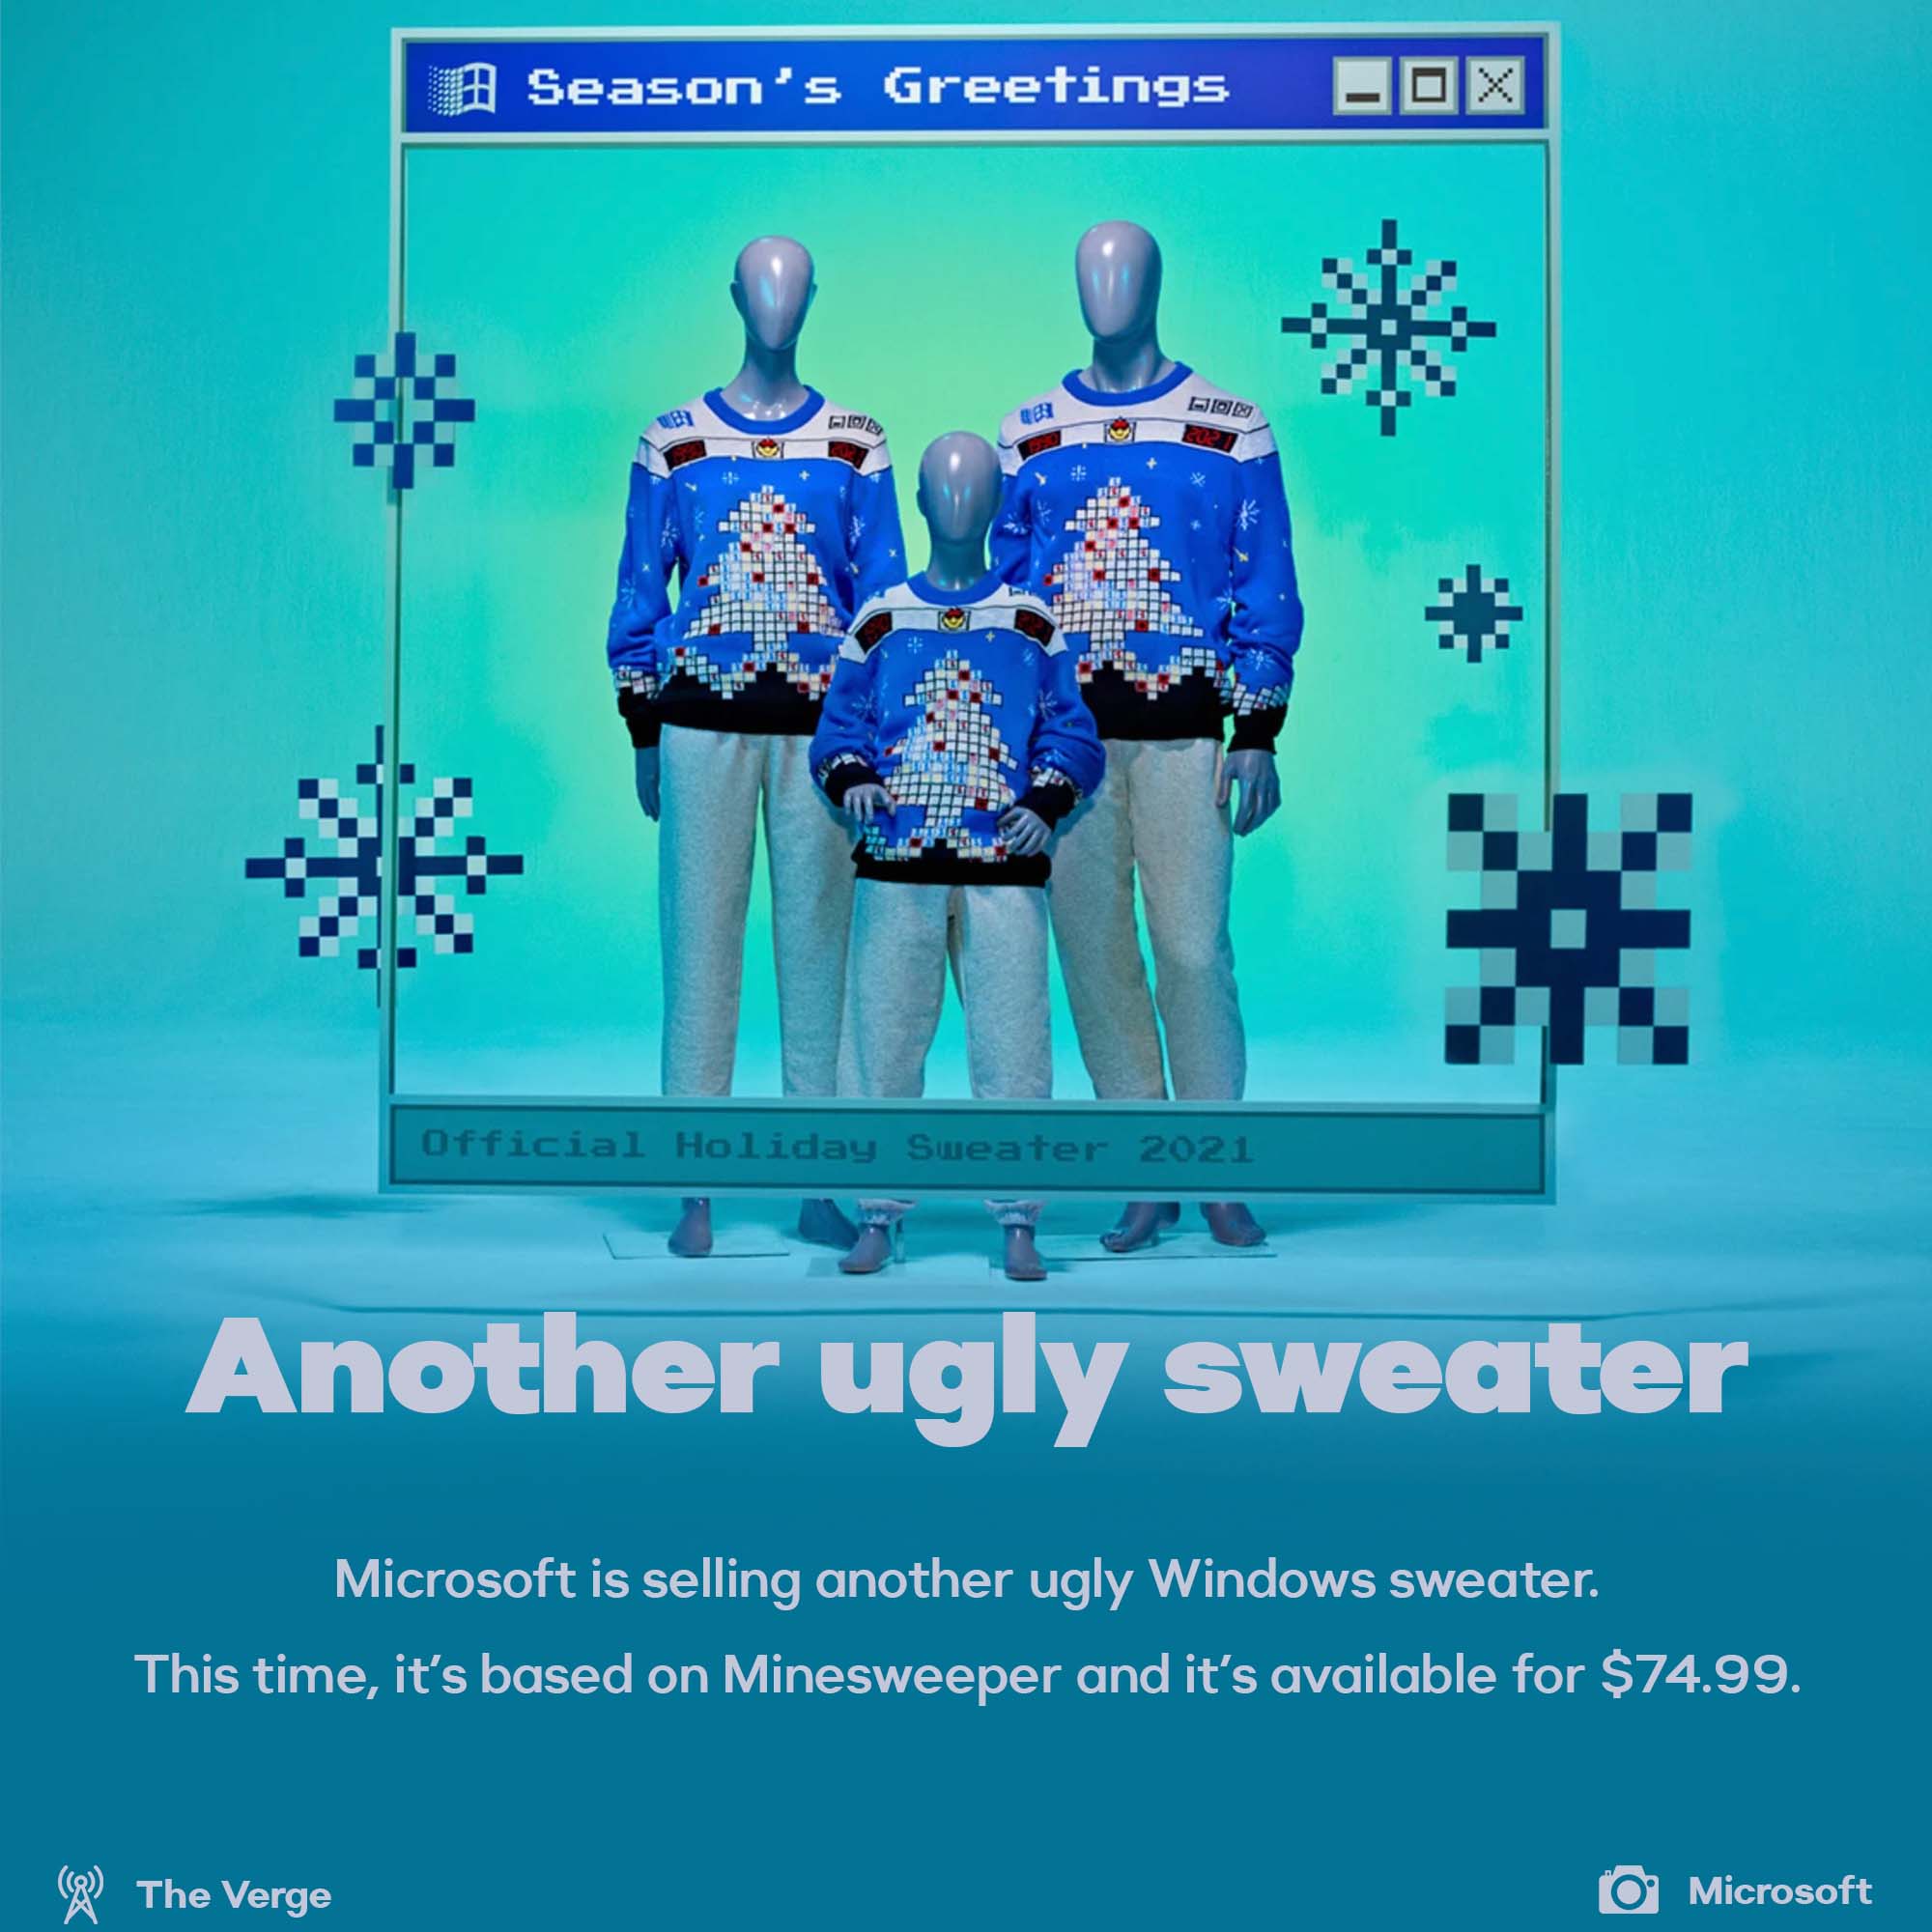 Microsoft released anoter ugly sweater